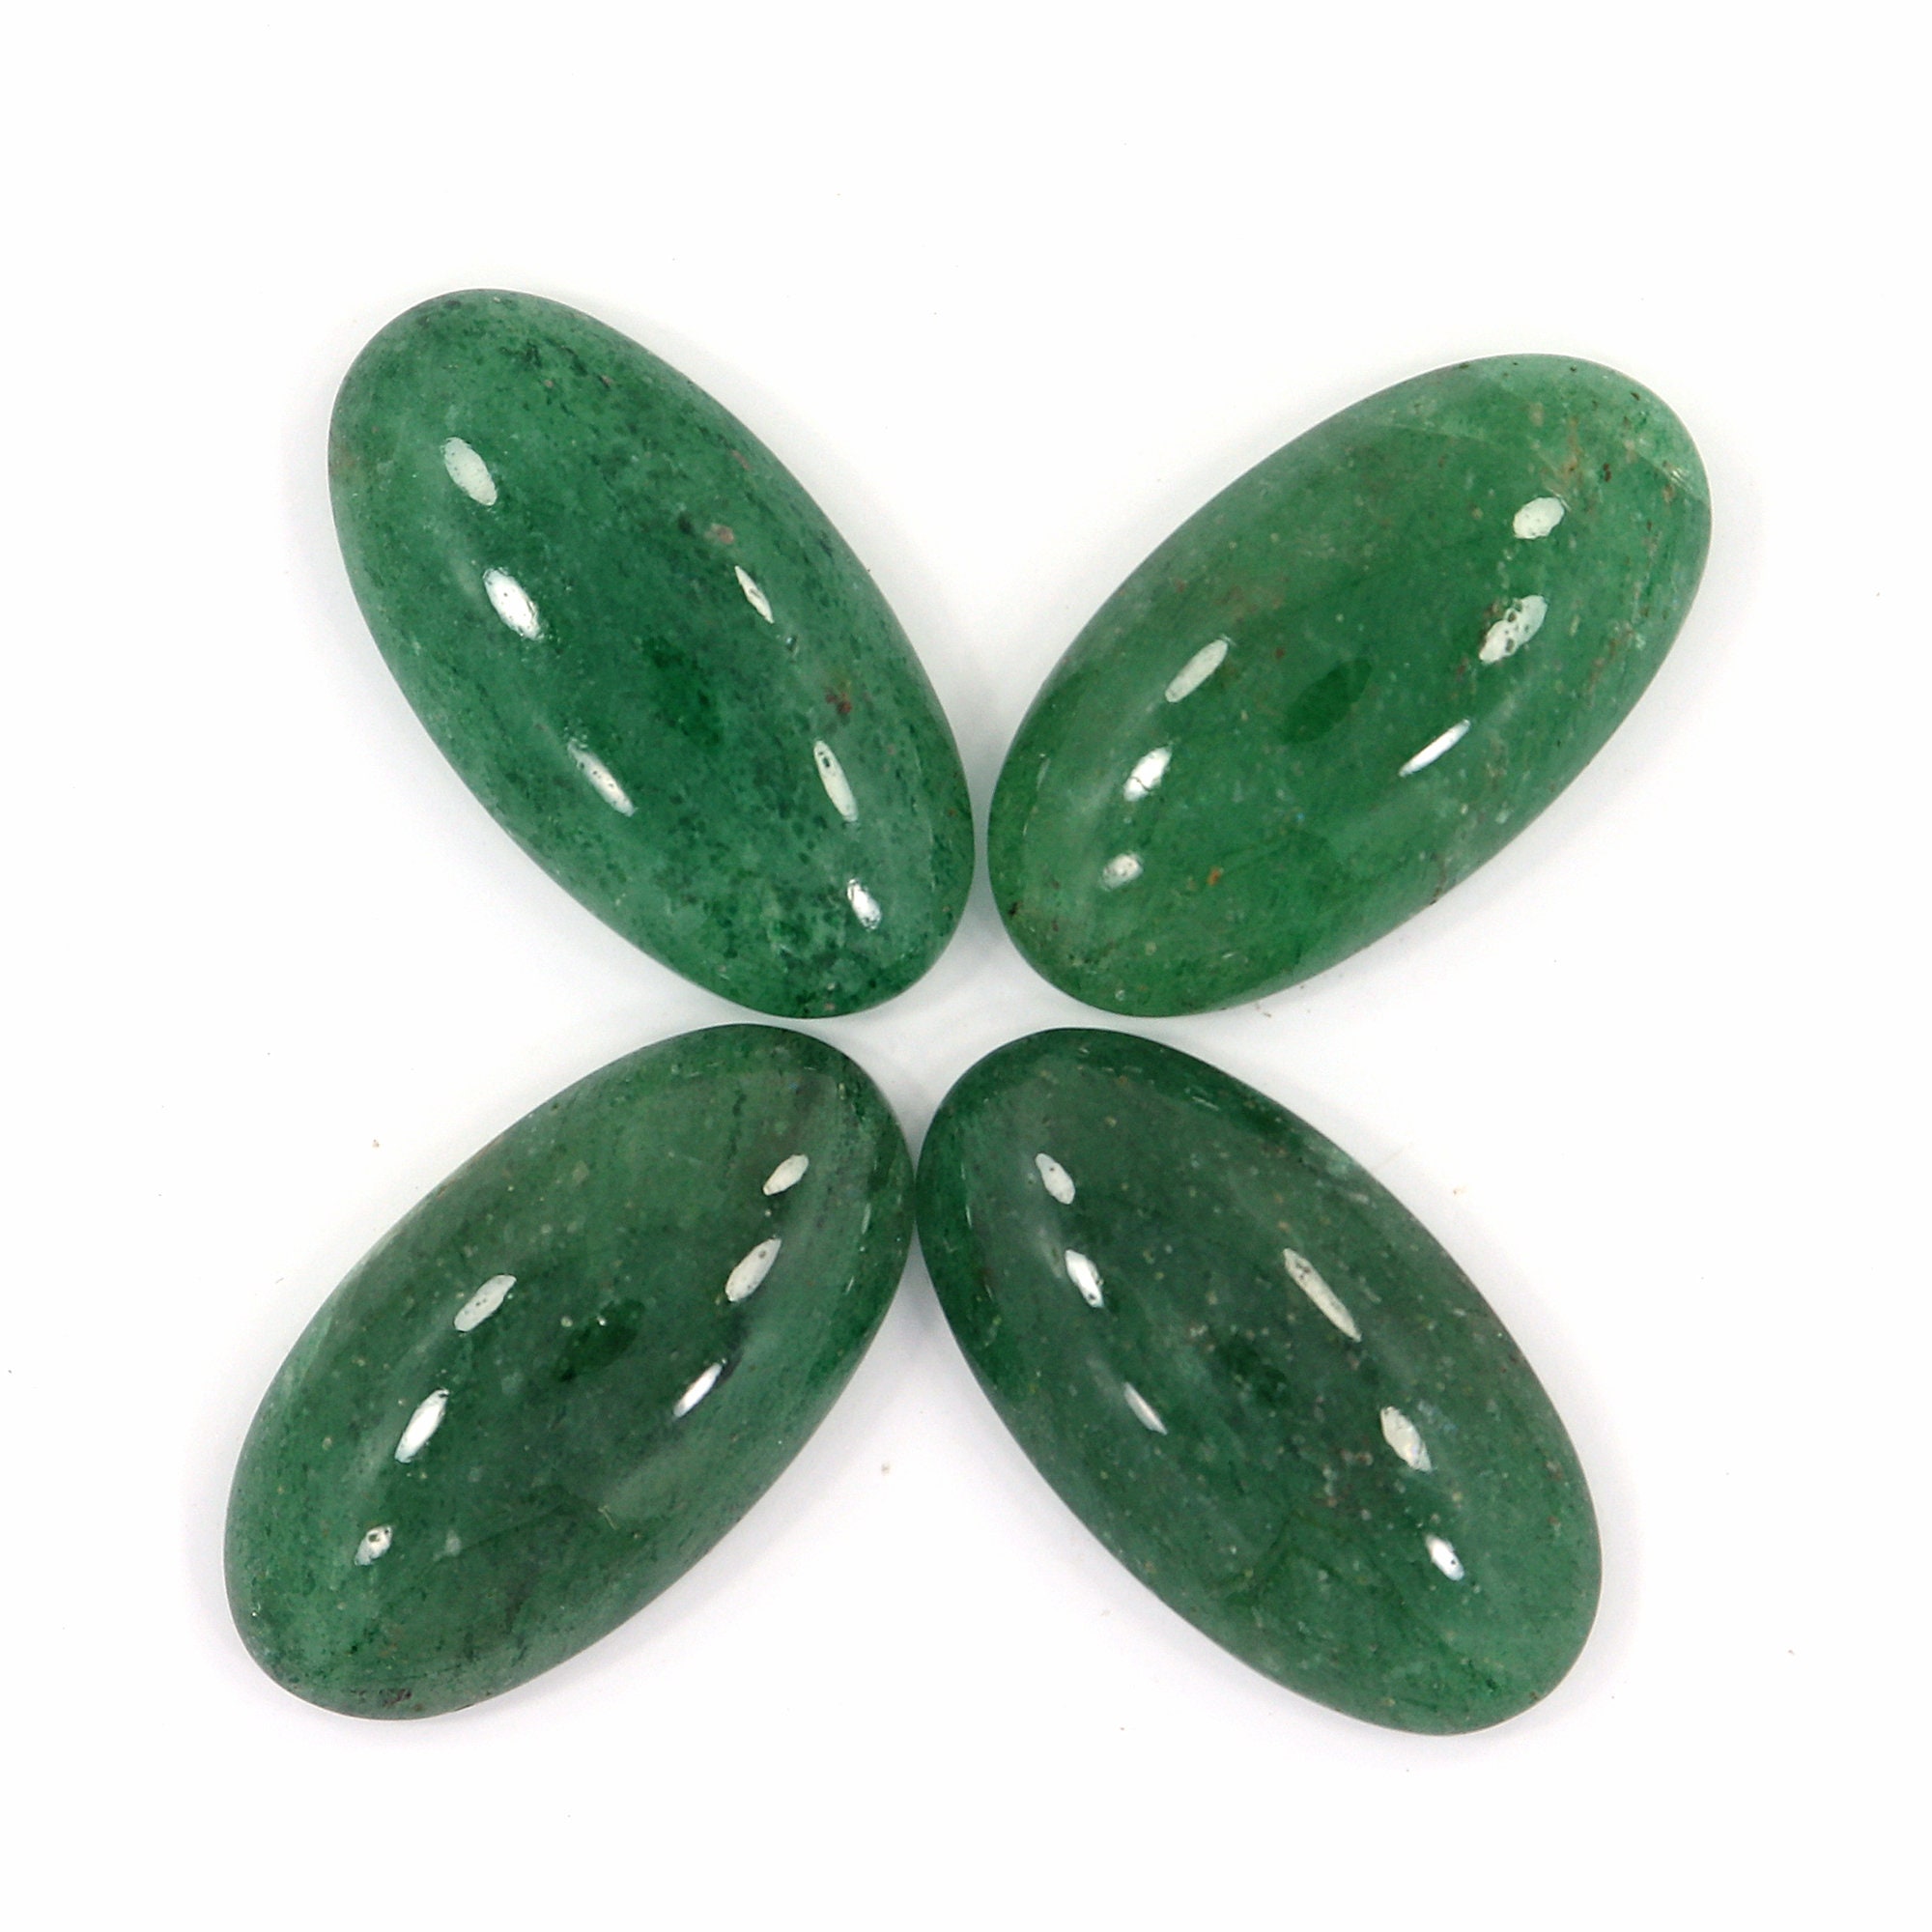 22.50 CTS  Natural Green Aventurine Cabochon Handmade Shape Oval Translucent Clarity Loose Gemstone Size 20X15X10 FS-324